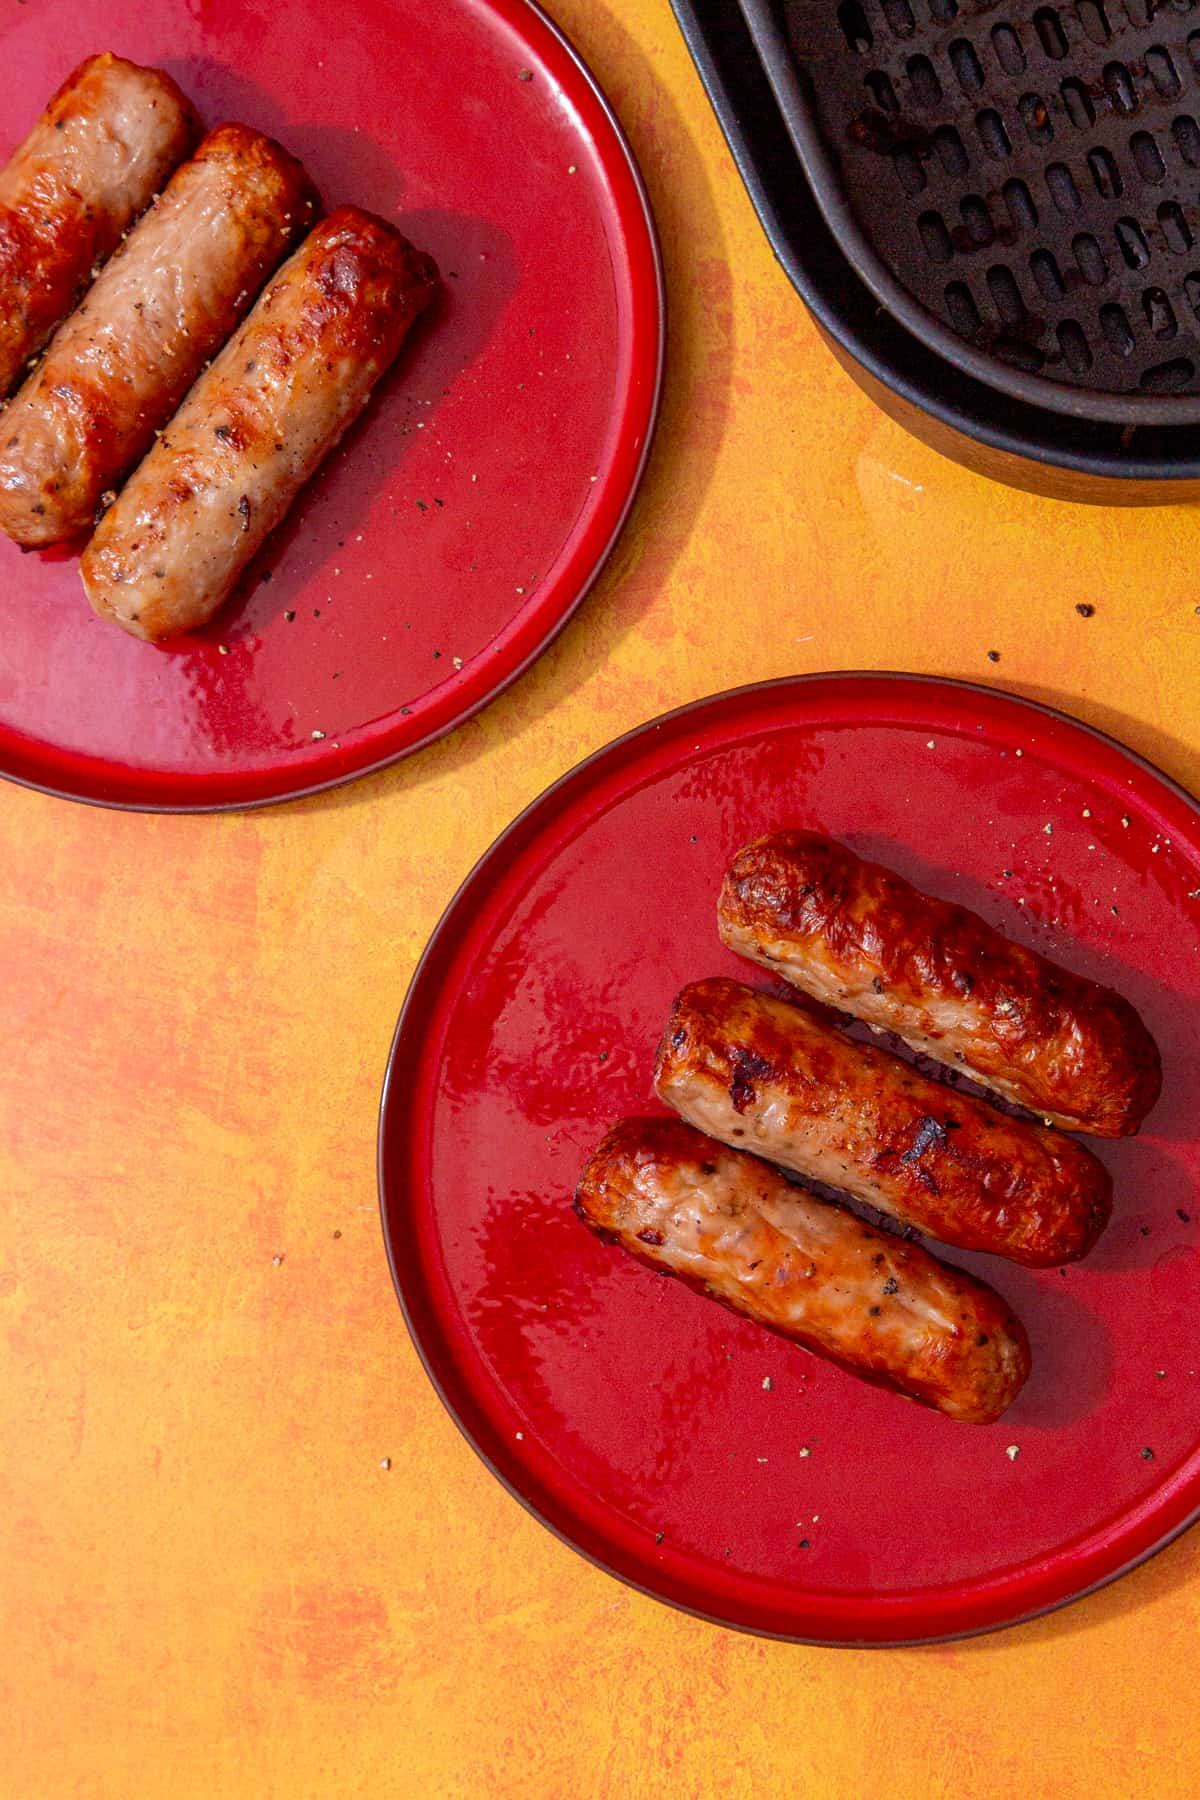 2 red plates with 3 cooked, browned sausages on each plate.